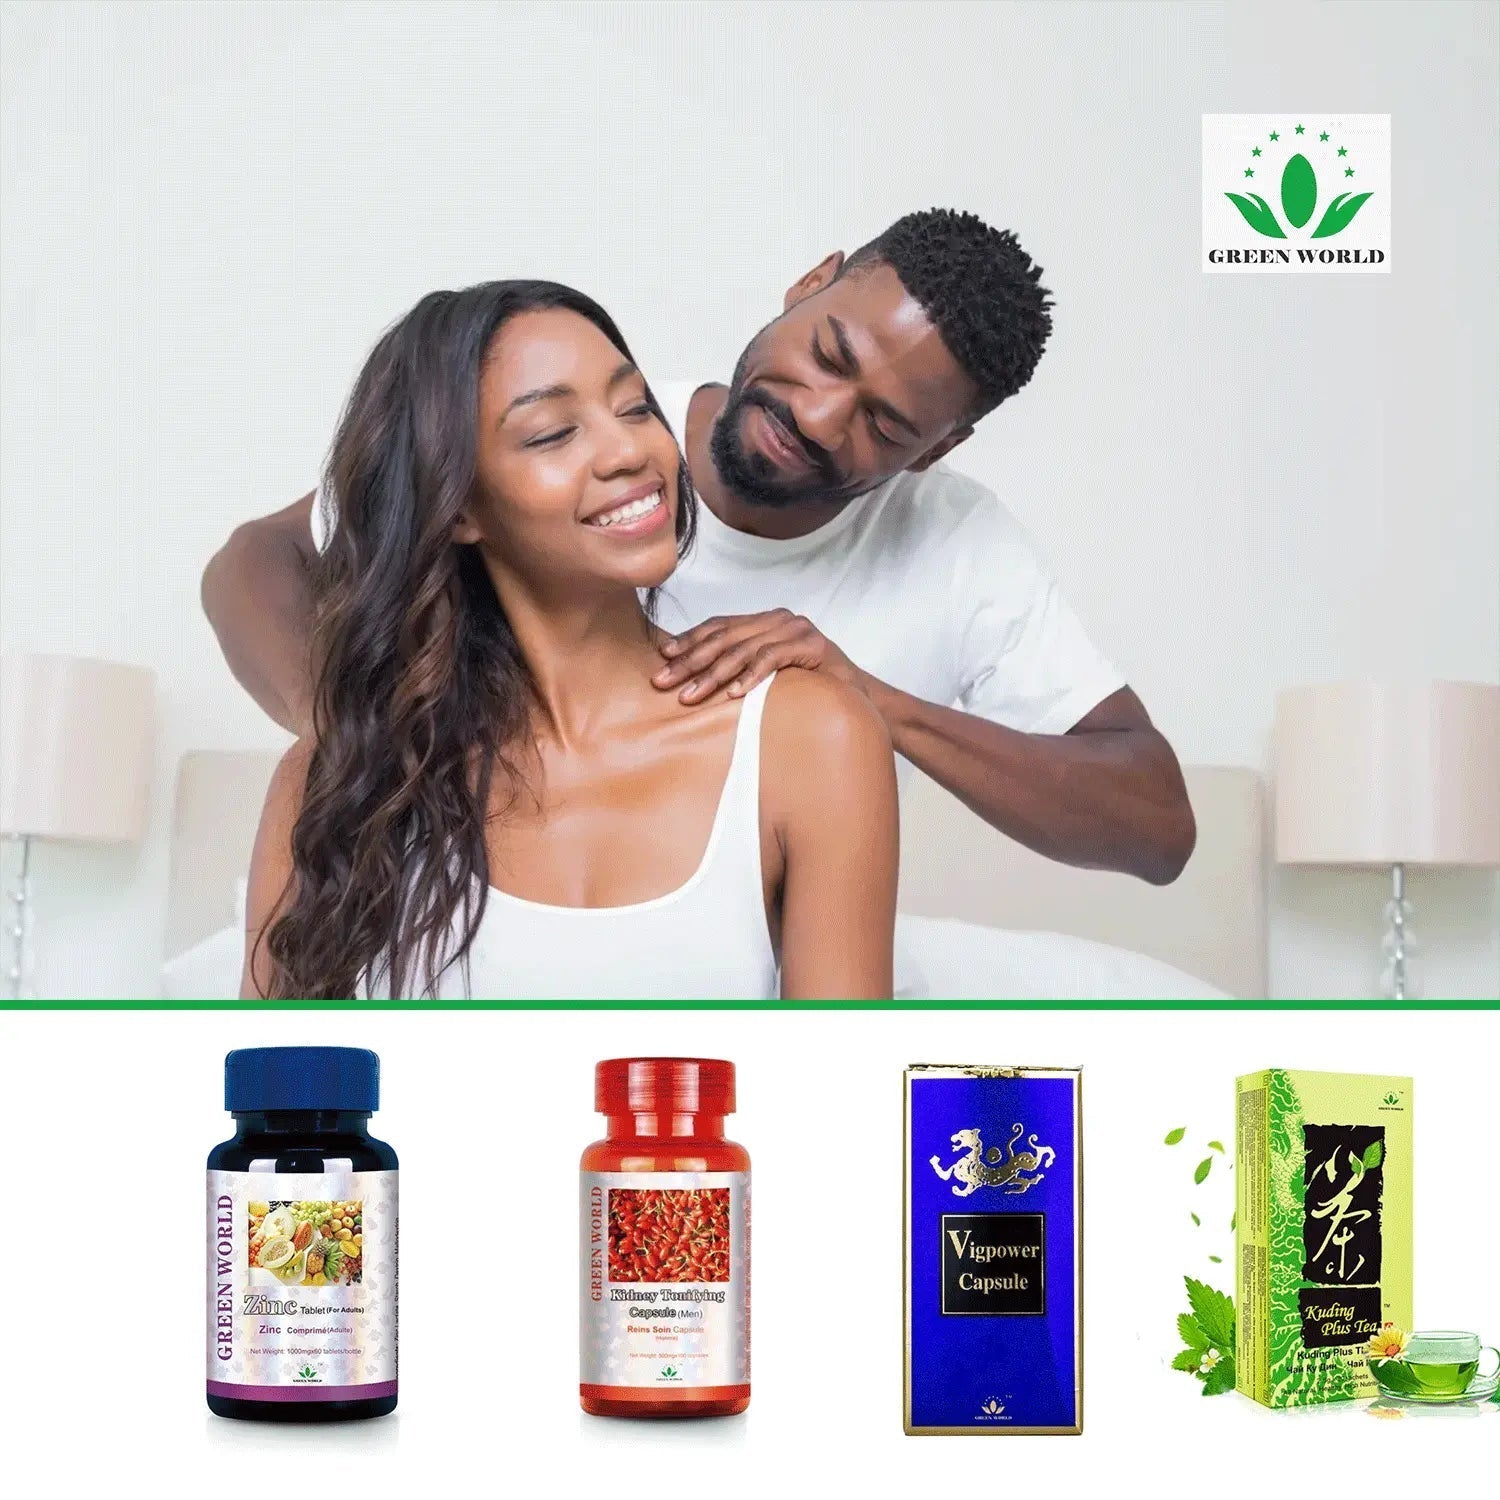 Ultimate Performance Enhancement Bundle: Strong Erection, Stamina & Premature Ejaculation | Green World health products